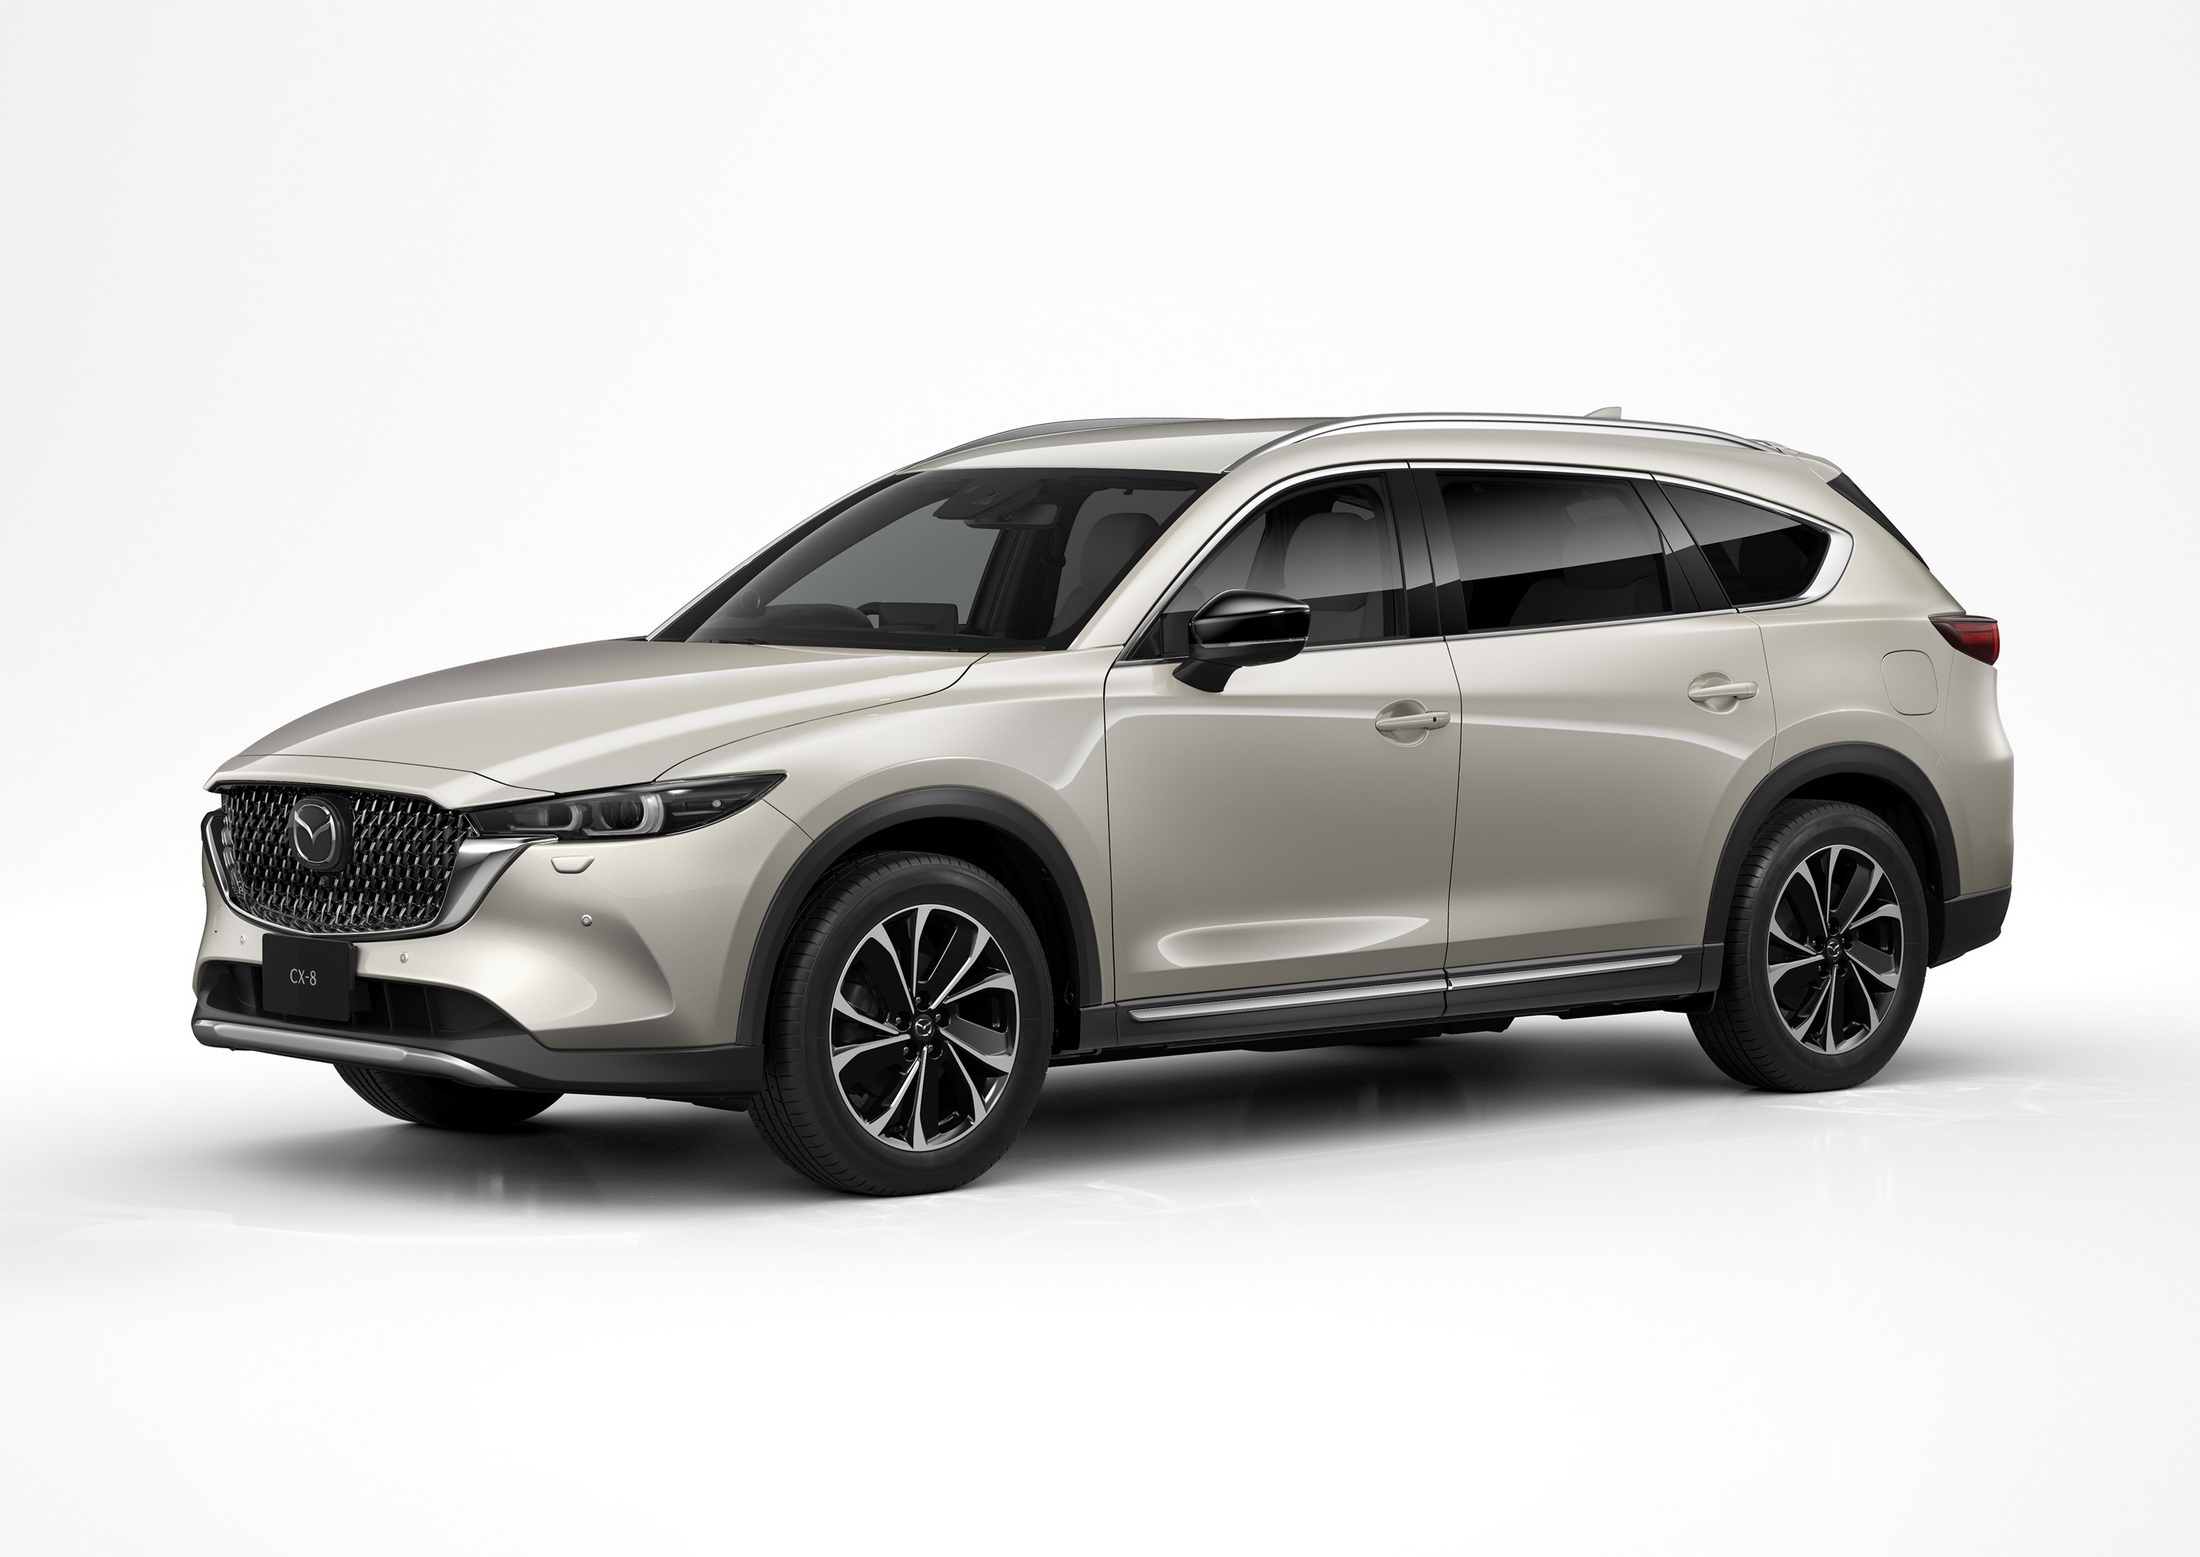 Mazda To Kill The CX-8, New CX-80 To Take Its Place